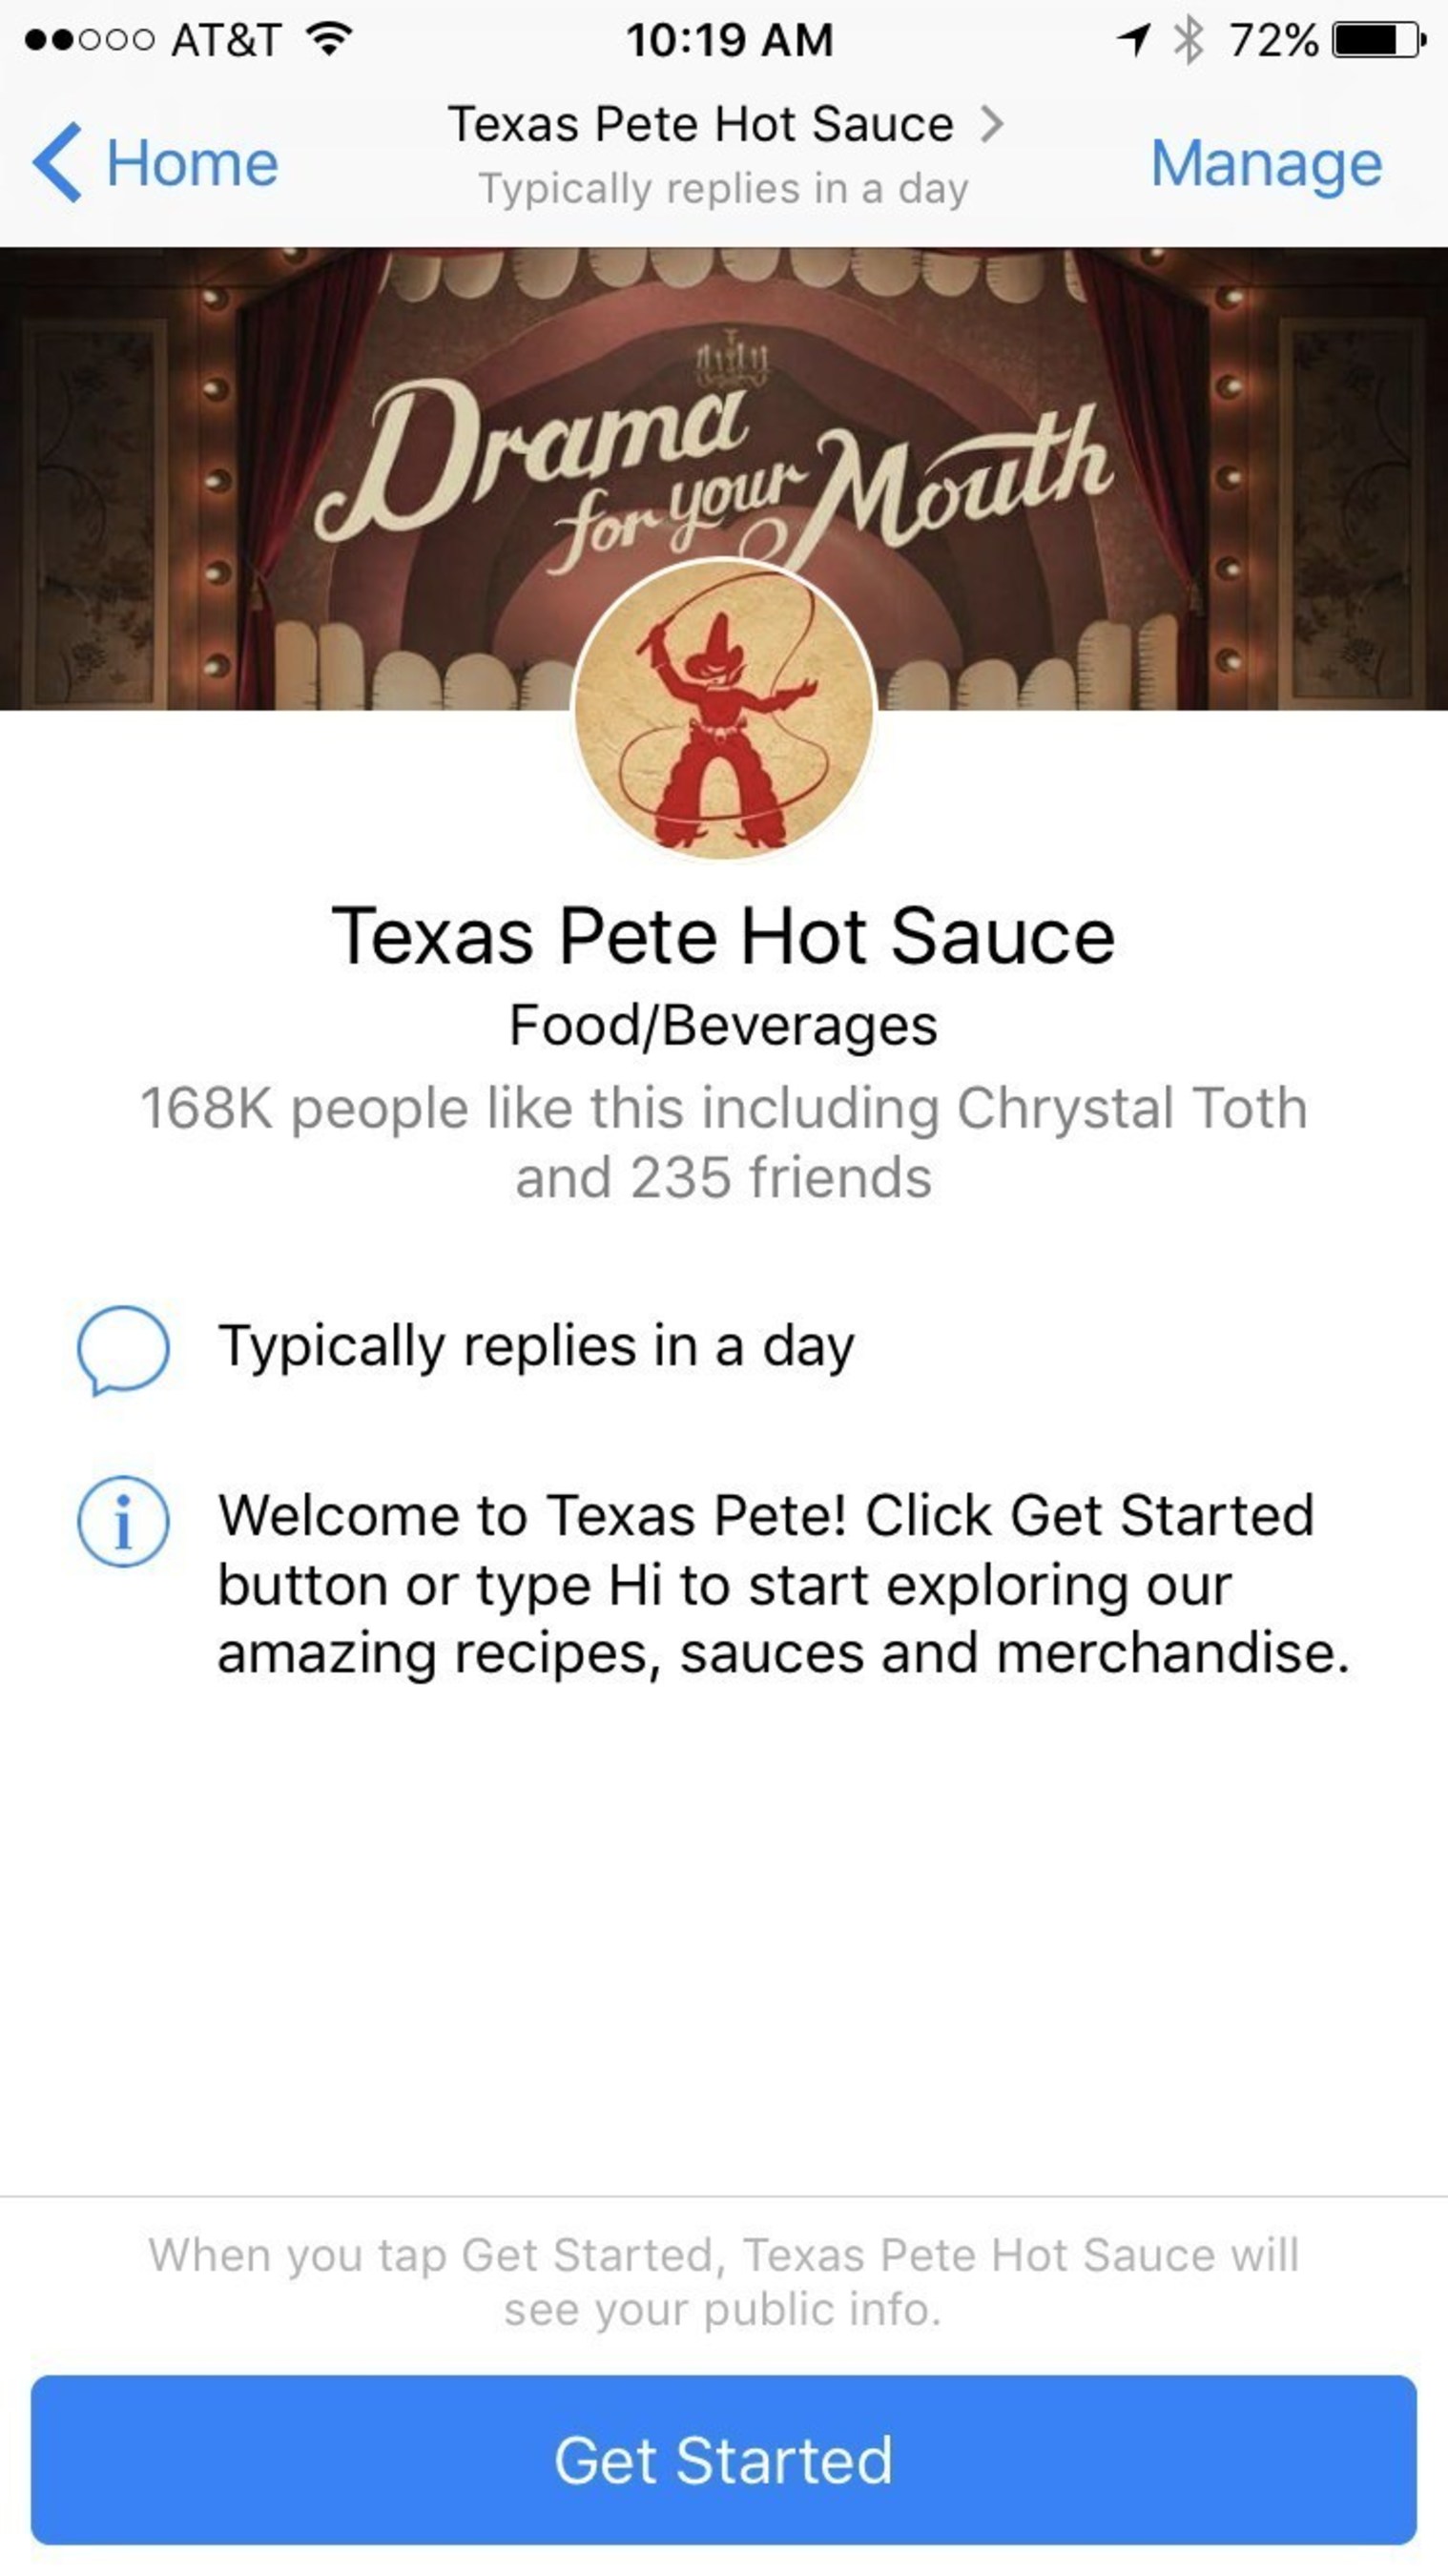 Texas Pete ChatBot powered by Parlo.